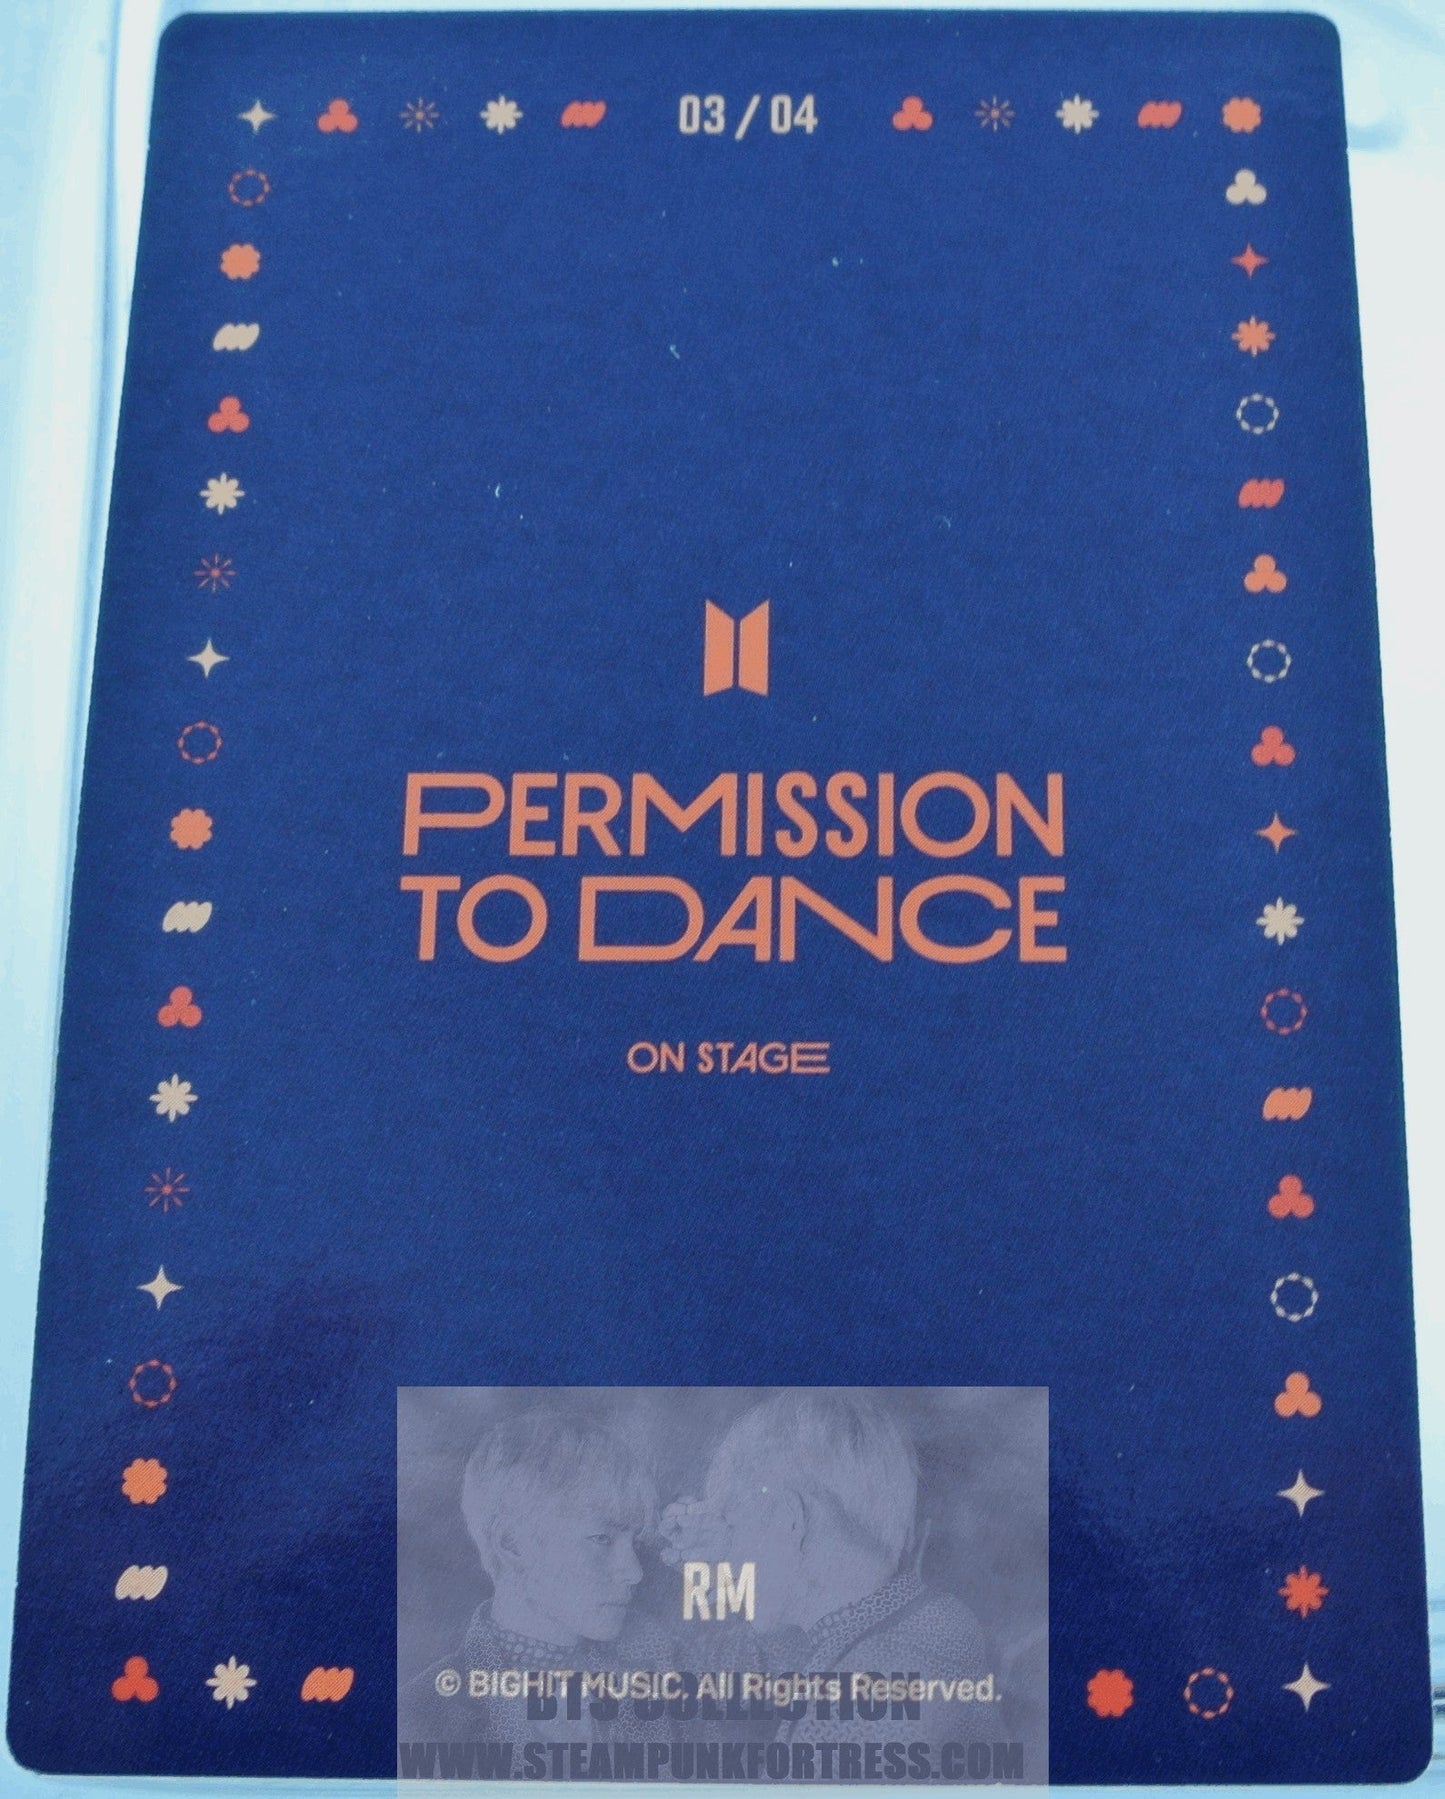 BTS RM KIM NAMJOON NAM-JOON 2022 PERMISSION TO DANCE ON STAGE SEOUL PTD #3 OF 4 PHOTOCARD PHOTO CARD NEW OFFICIAL MERCHANDISE